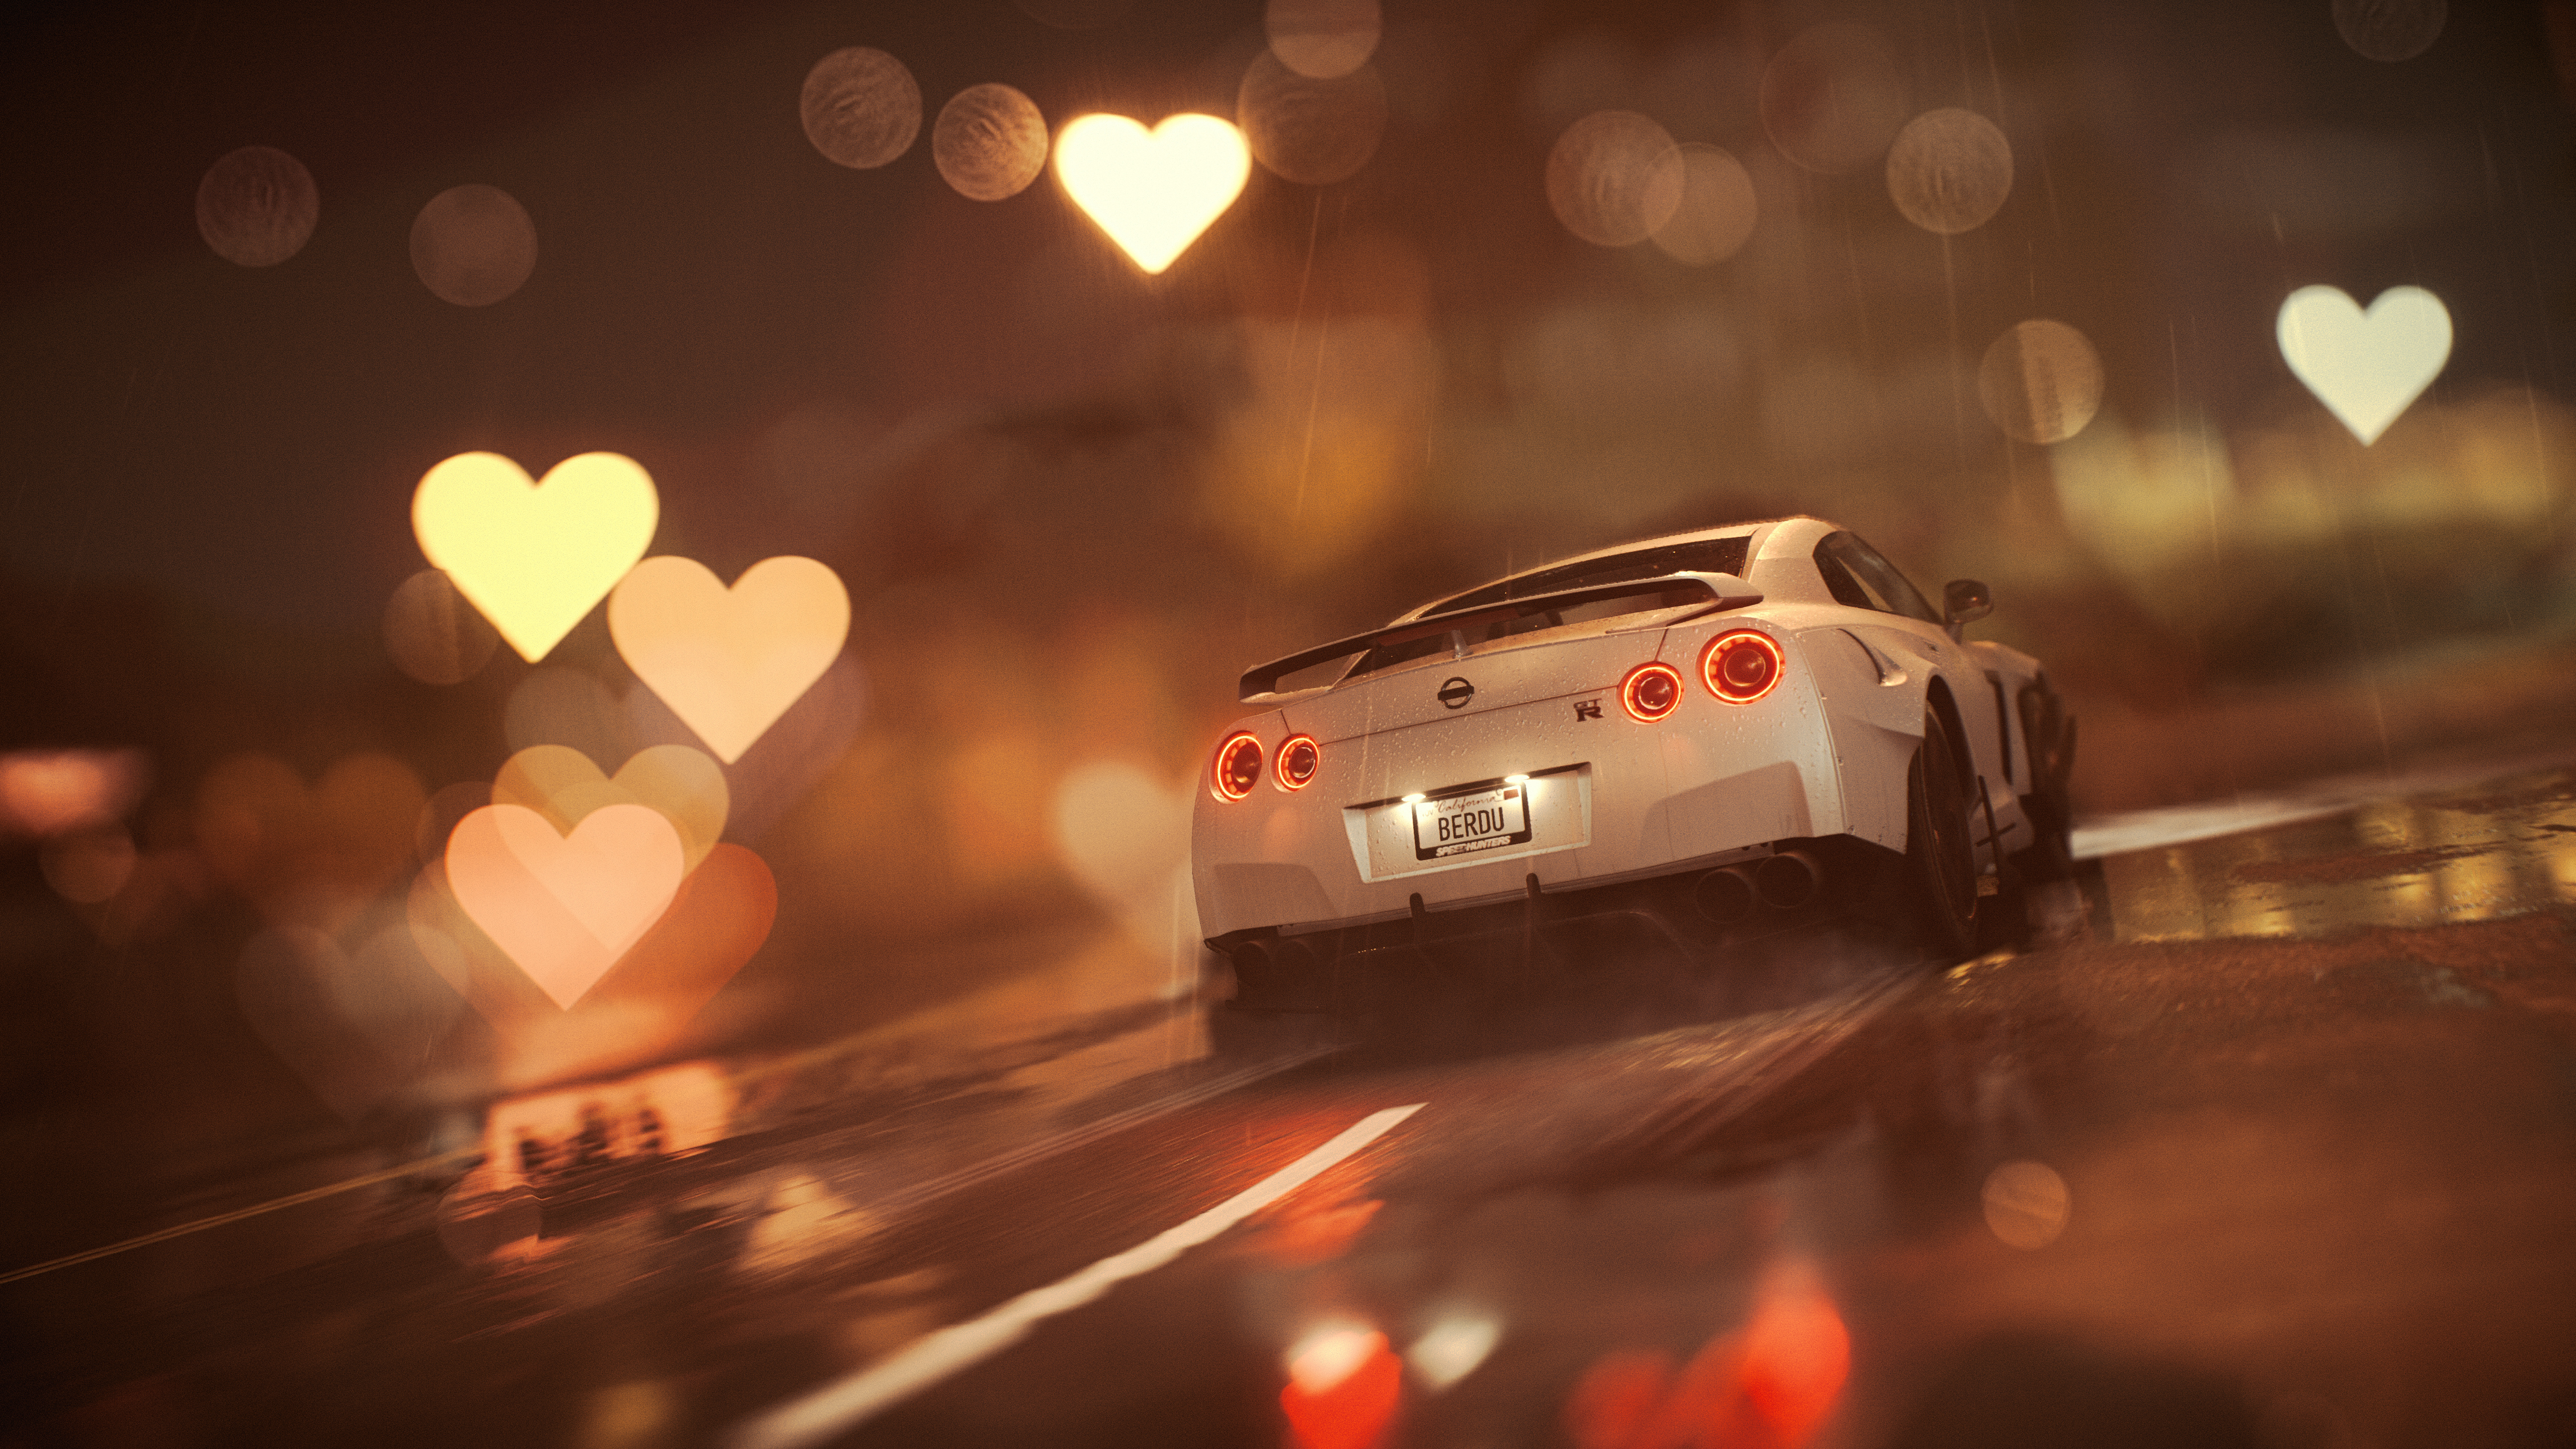 Need For Speed Nissan Gt R 5120x2880